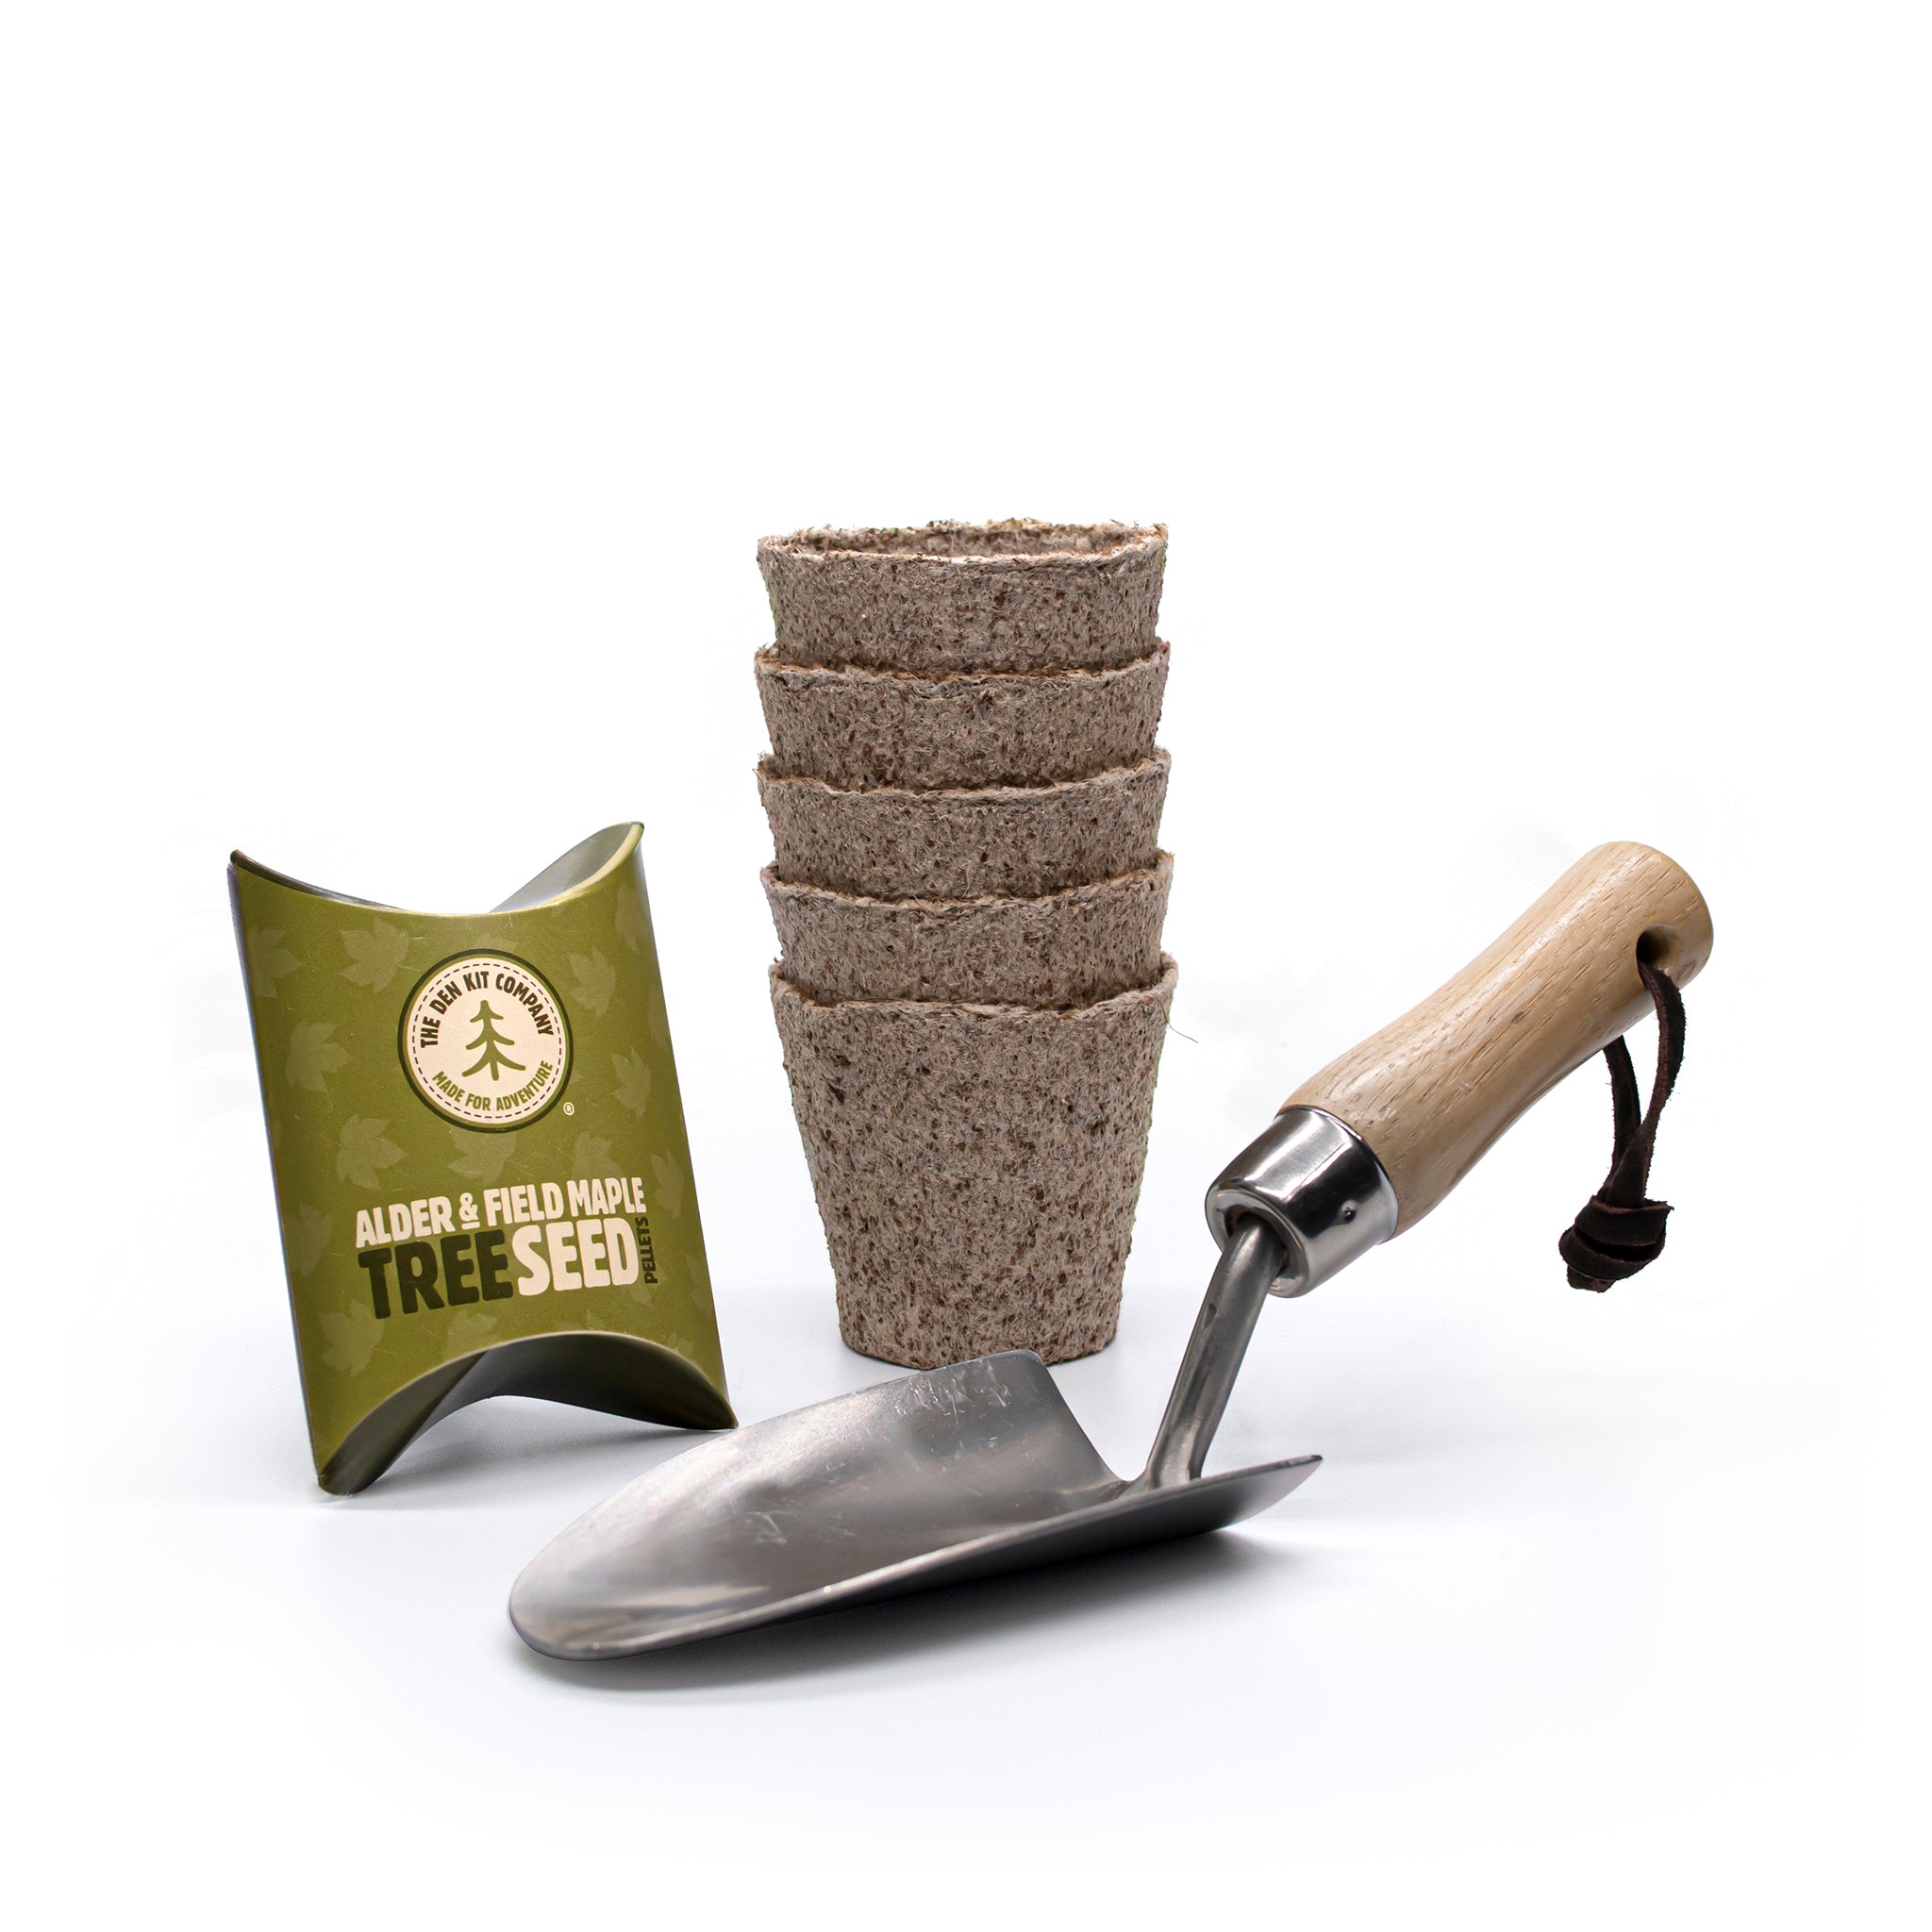 Plant a tree kit contents, an ash wooden garden trowel, coir pots and tree seeds up against a white background